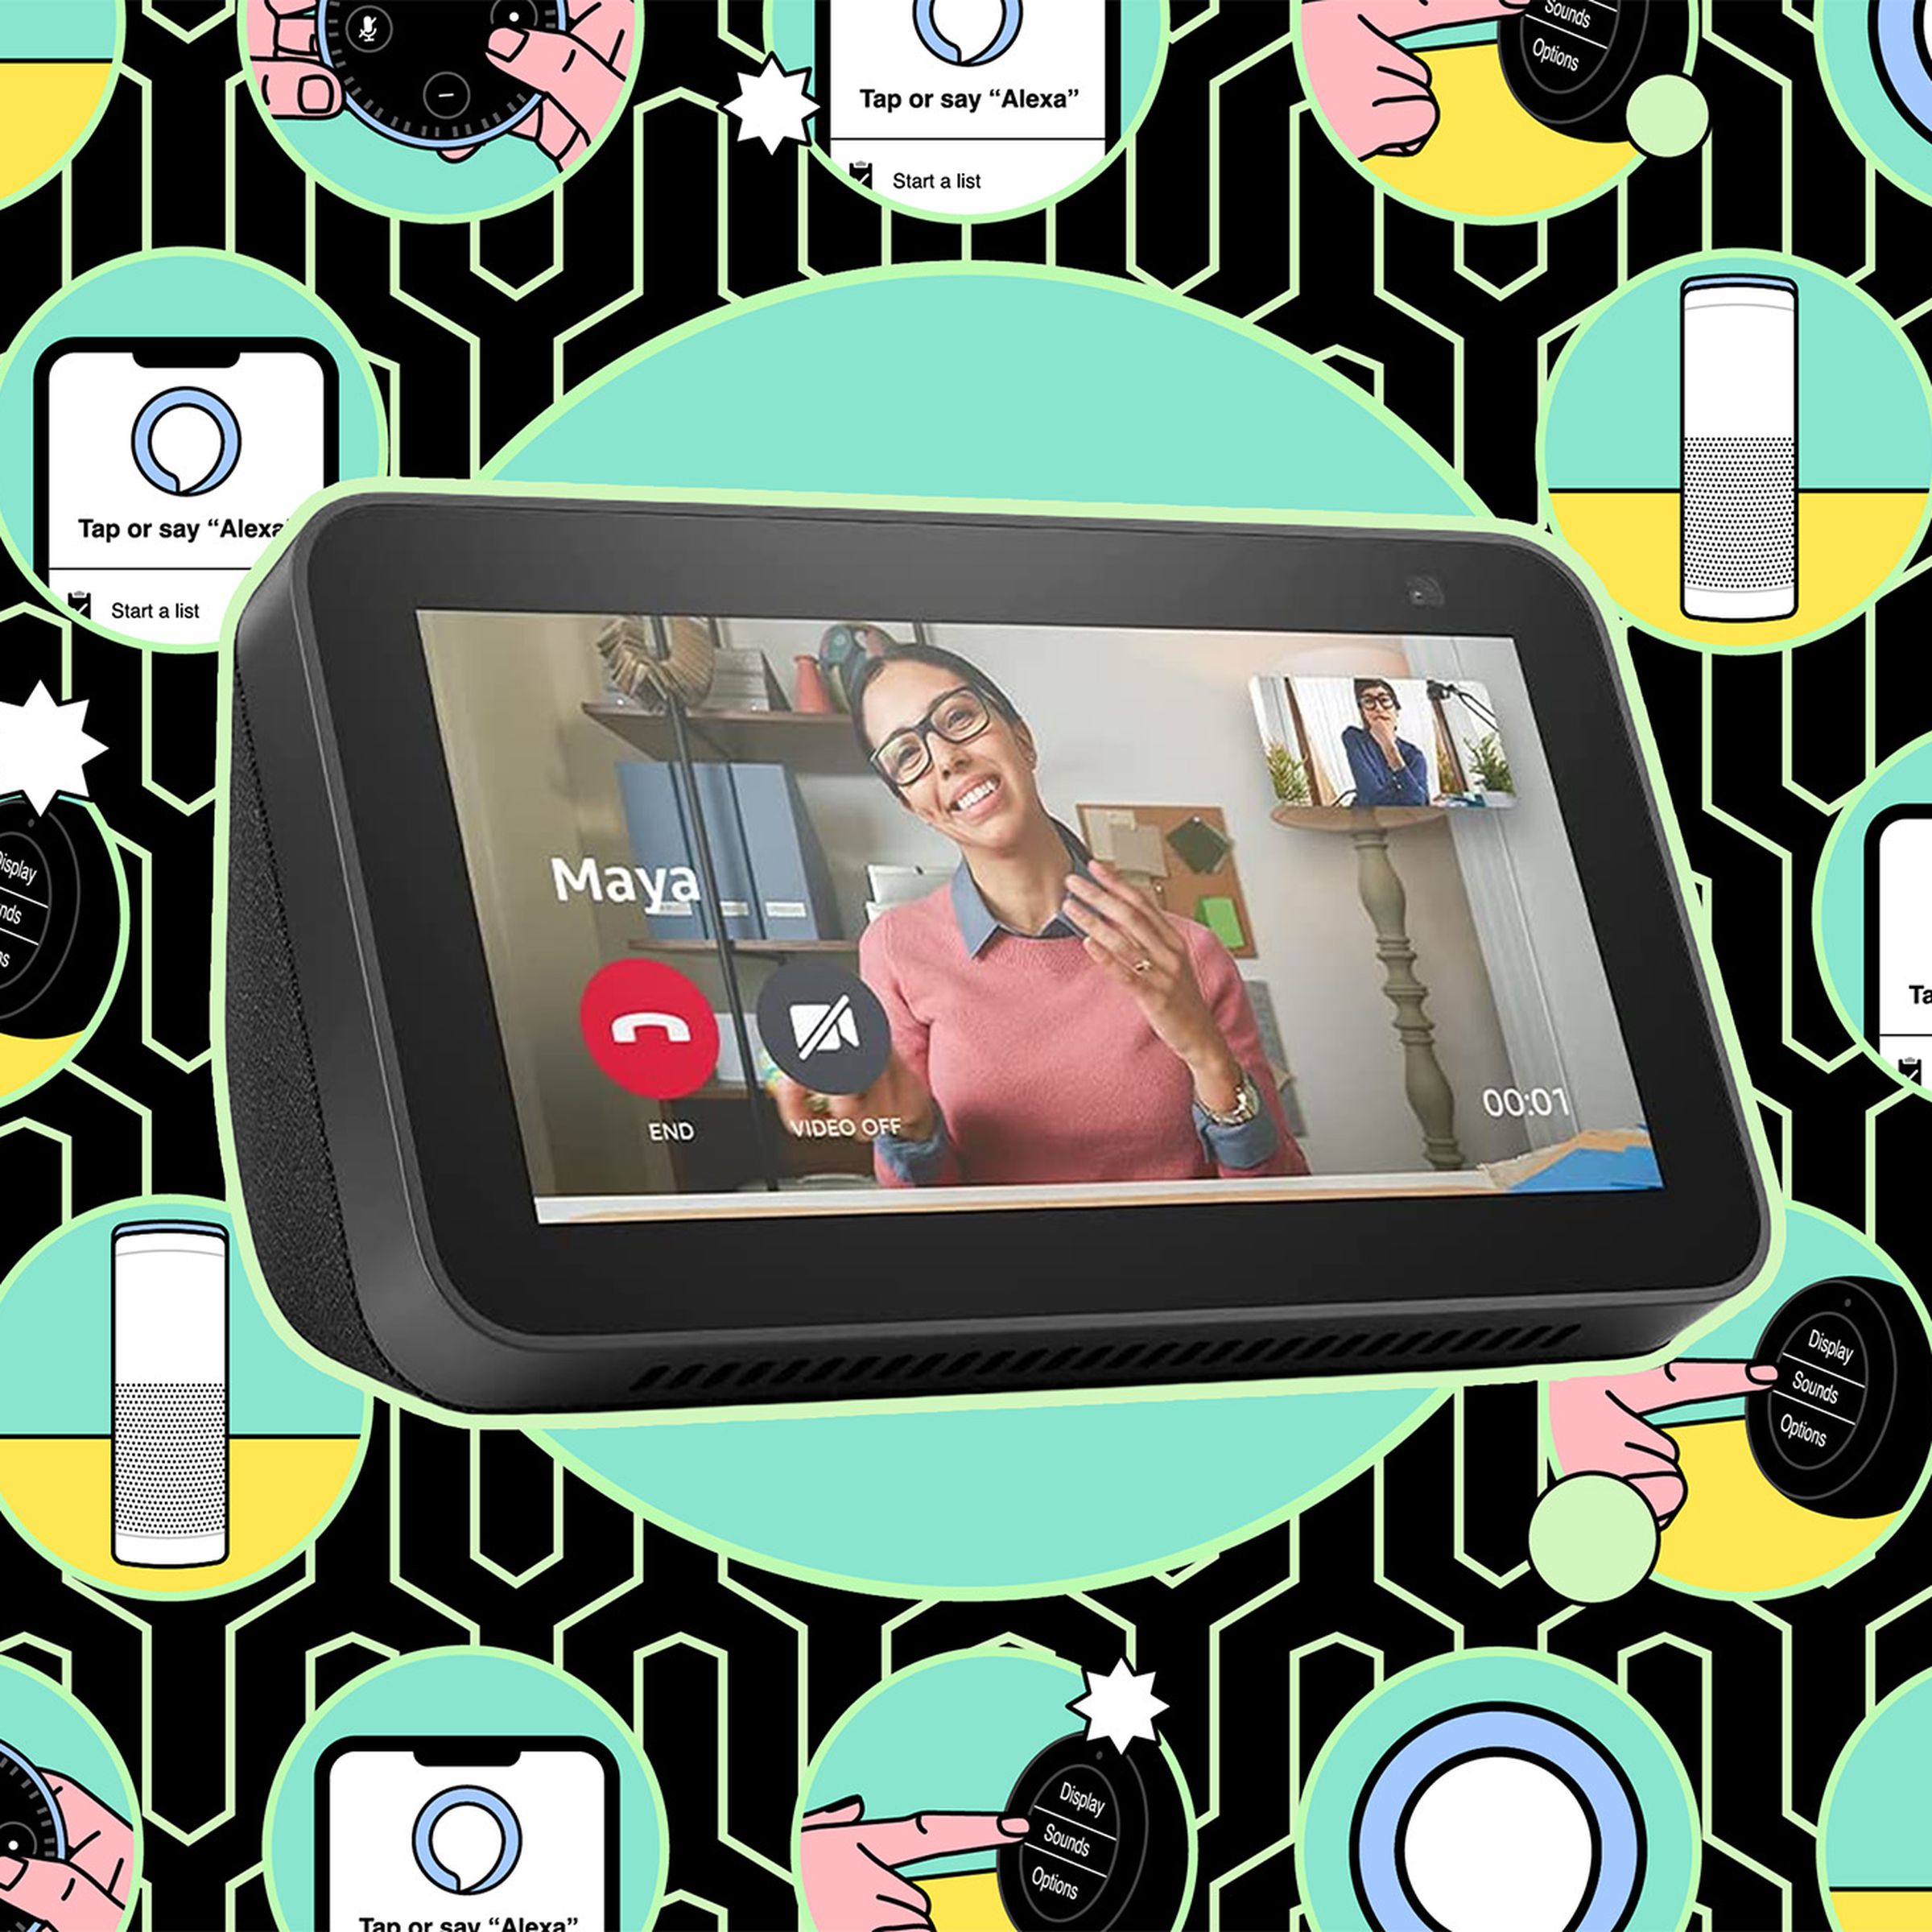 Echo show showing person on screen against an illustrated background.